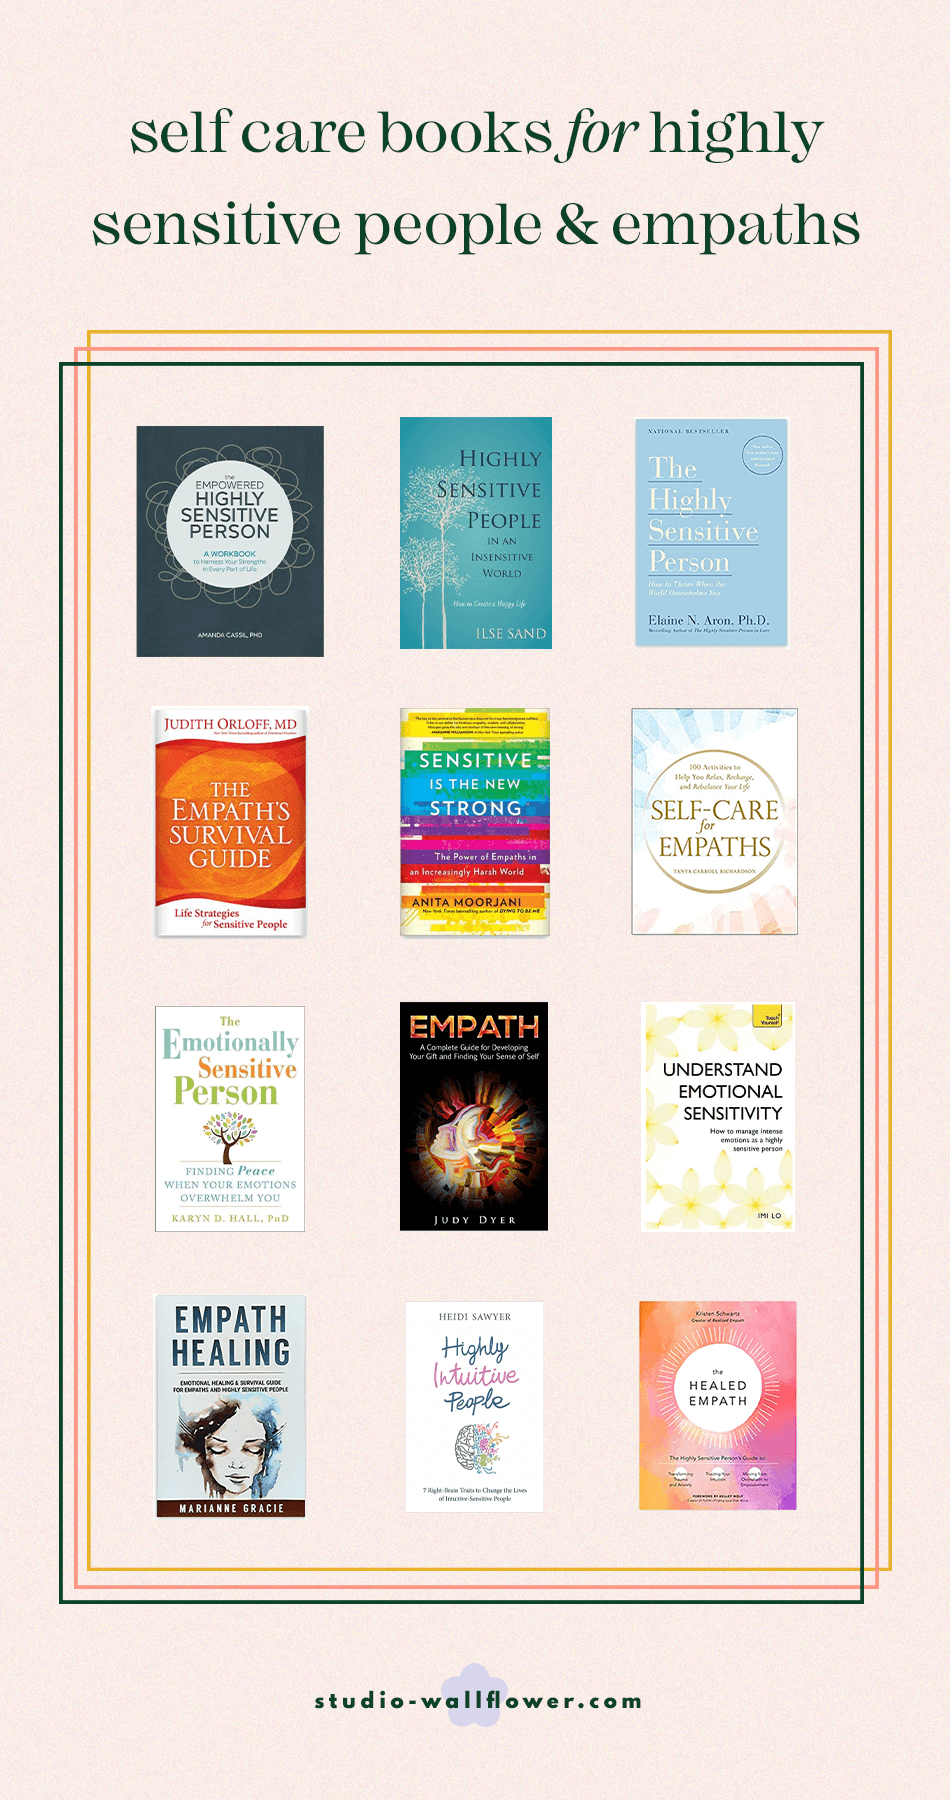 12 Self Care Books for Highly Sensitive People (HSPs) and Empaths via wallflower